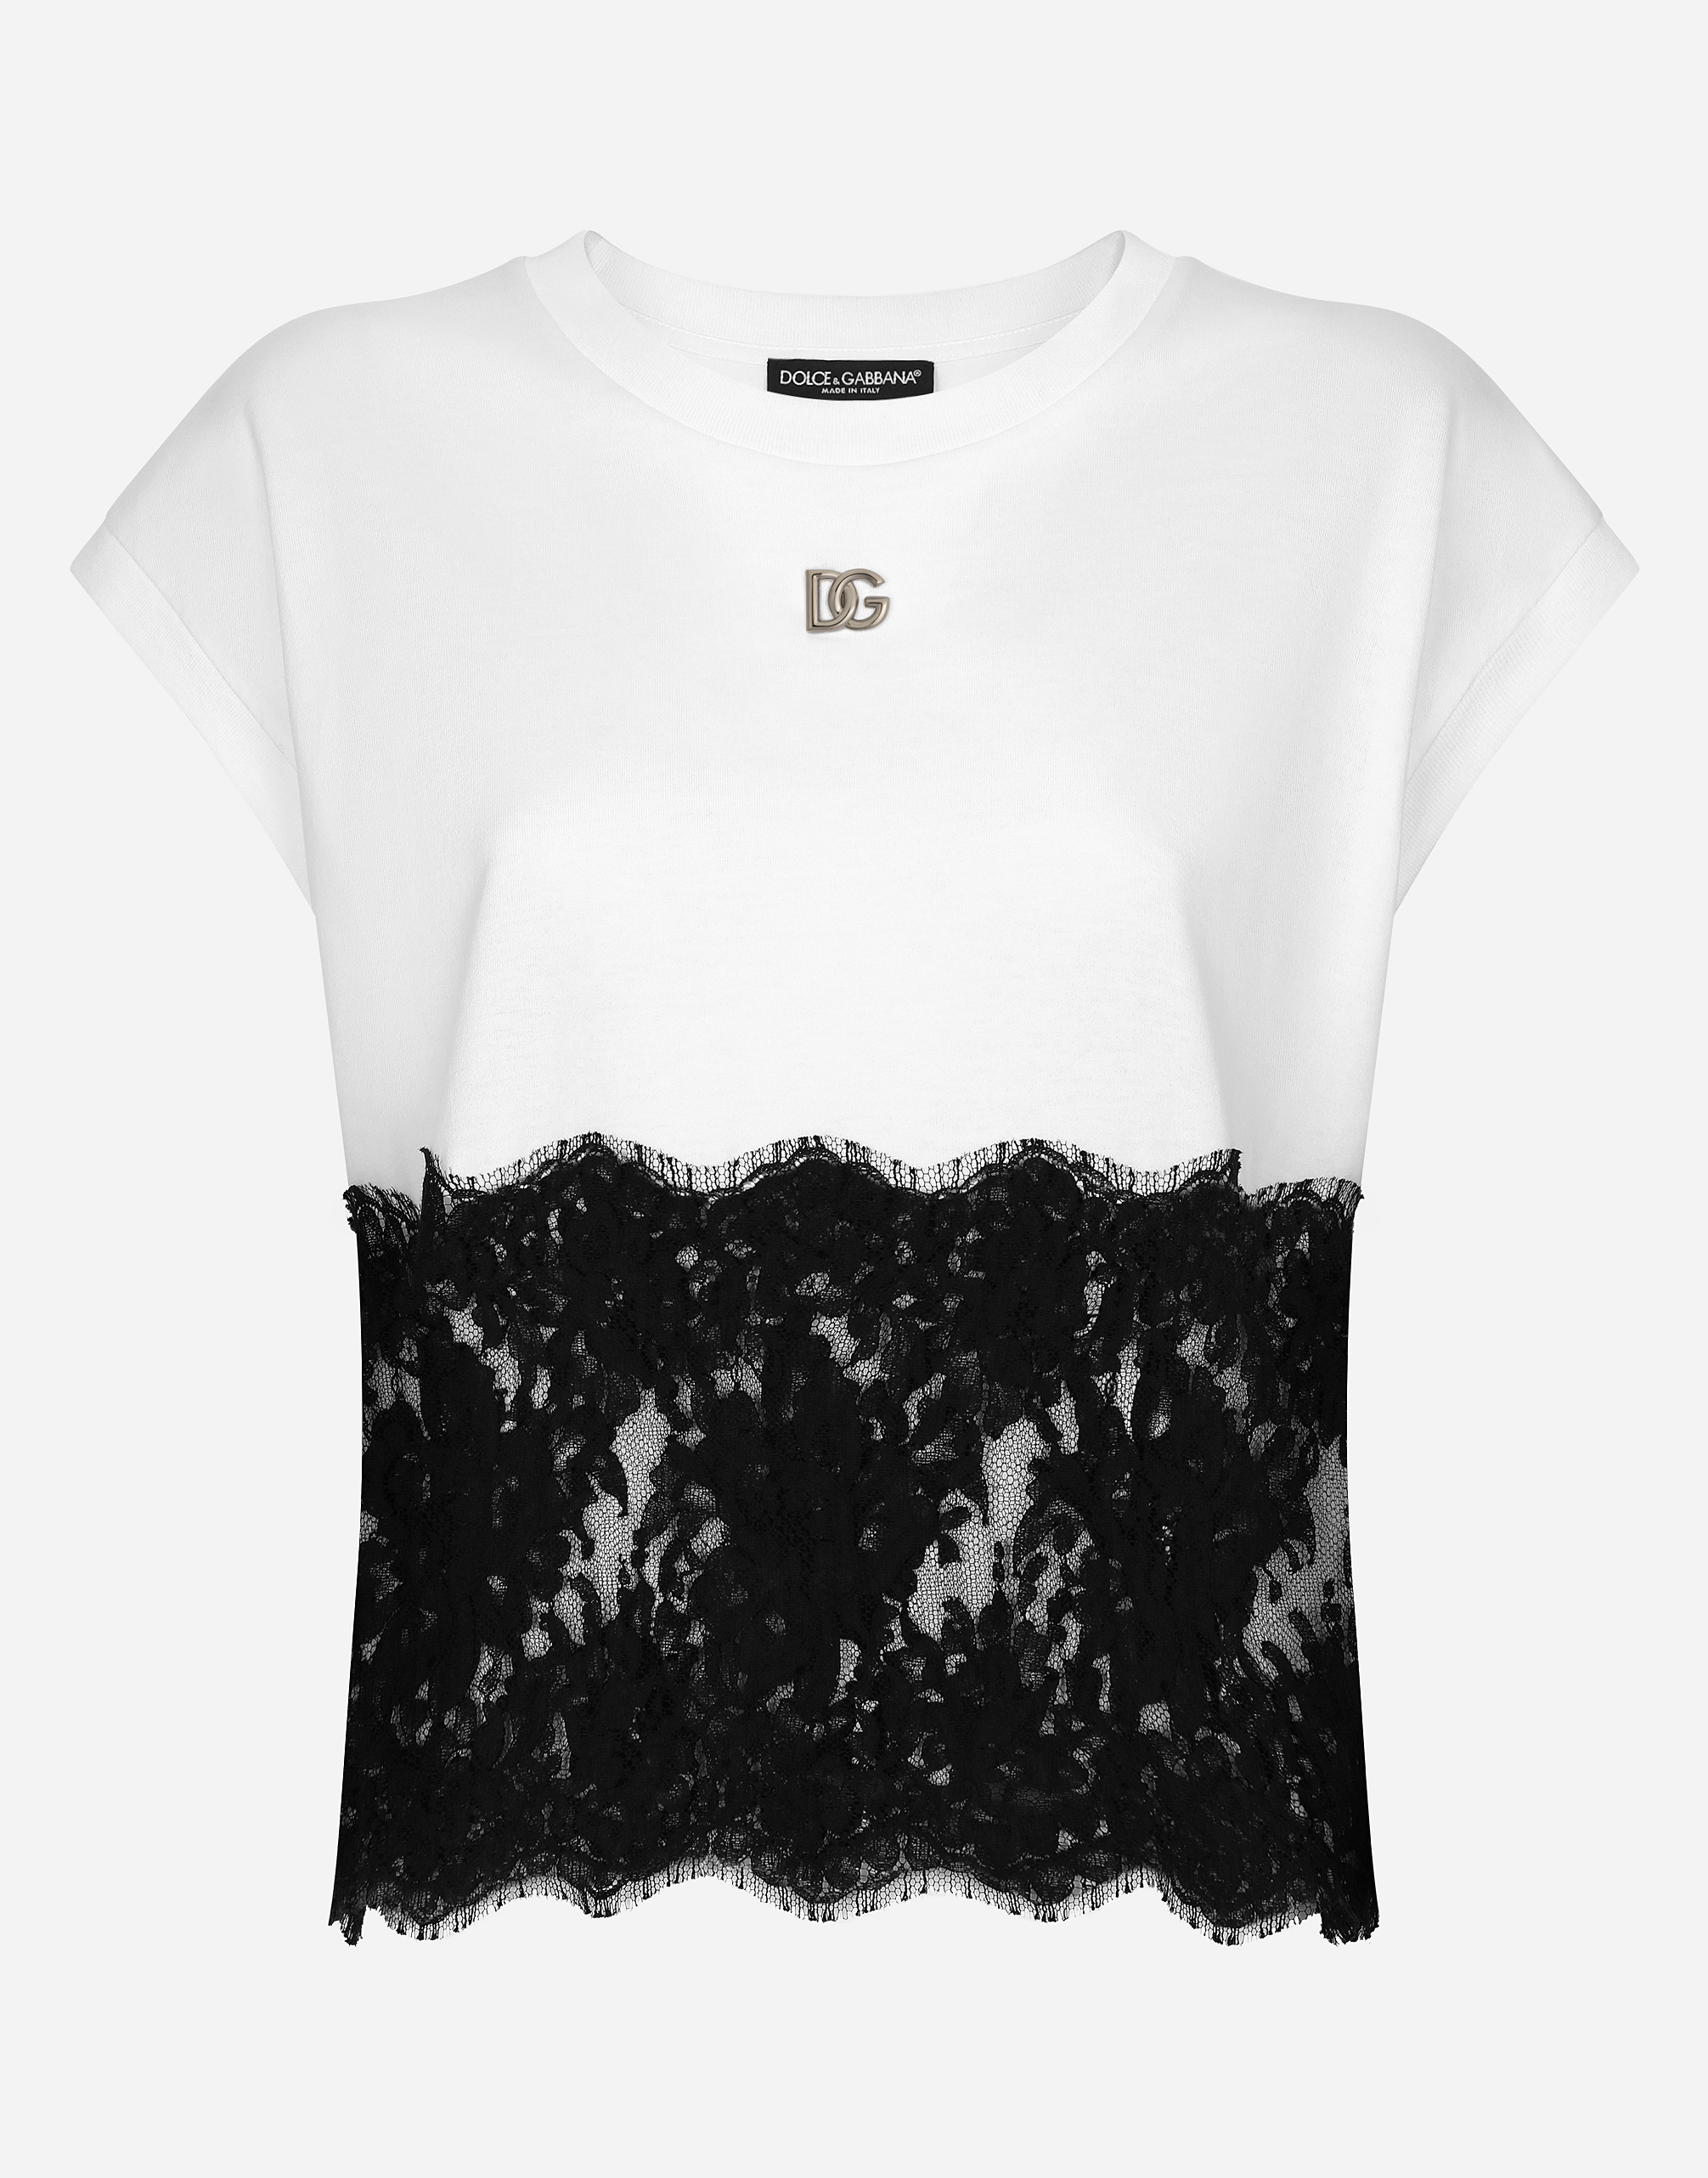 Jersey T-shirt with DG logo and lace details